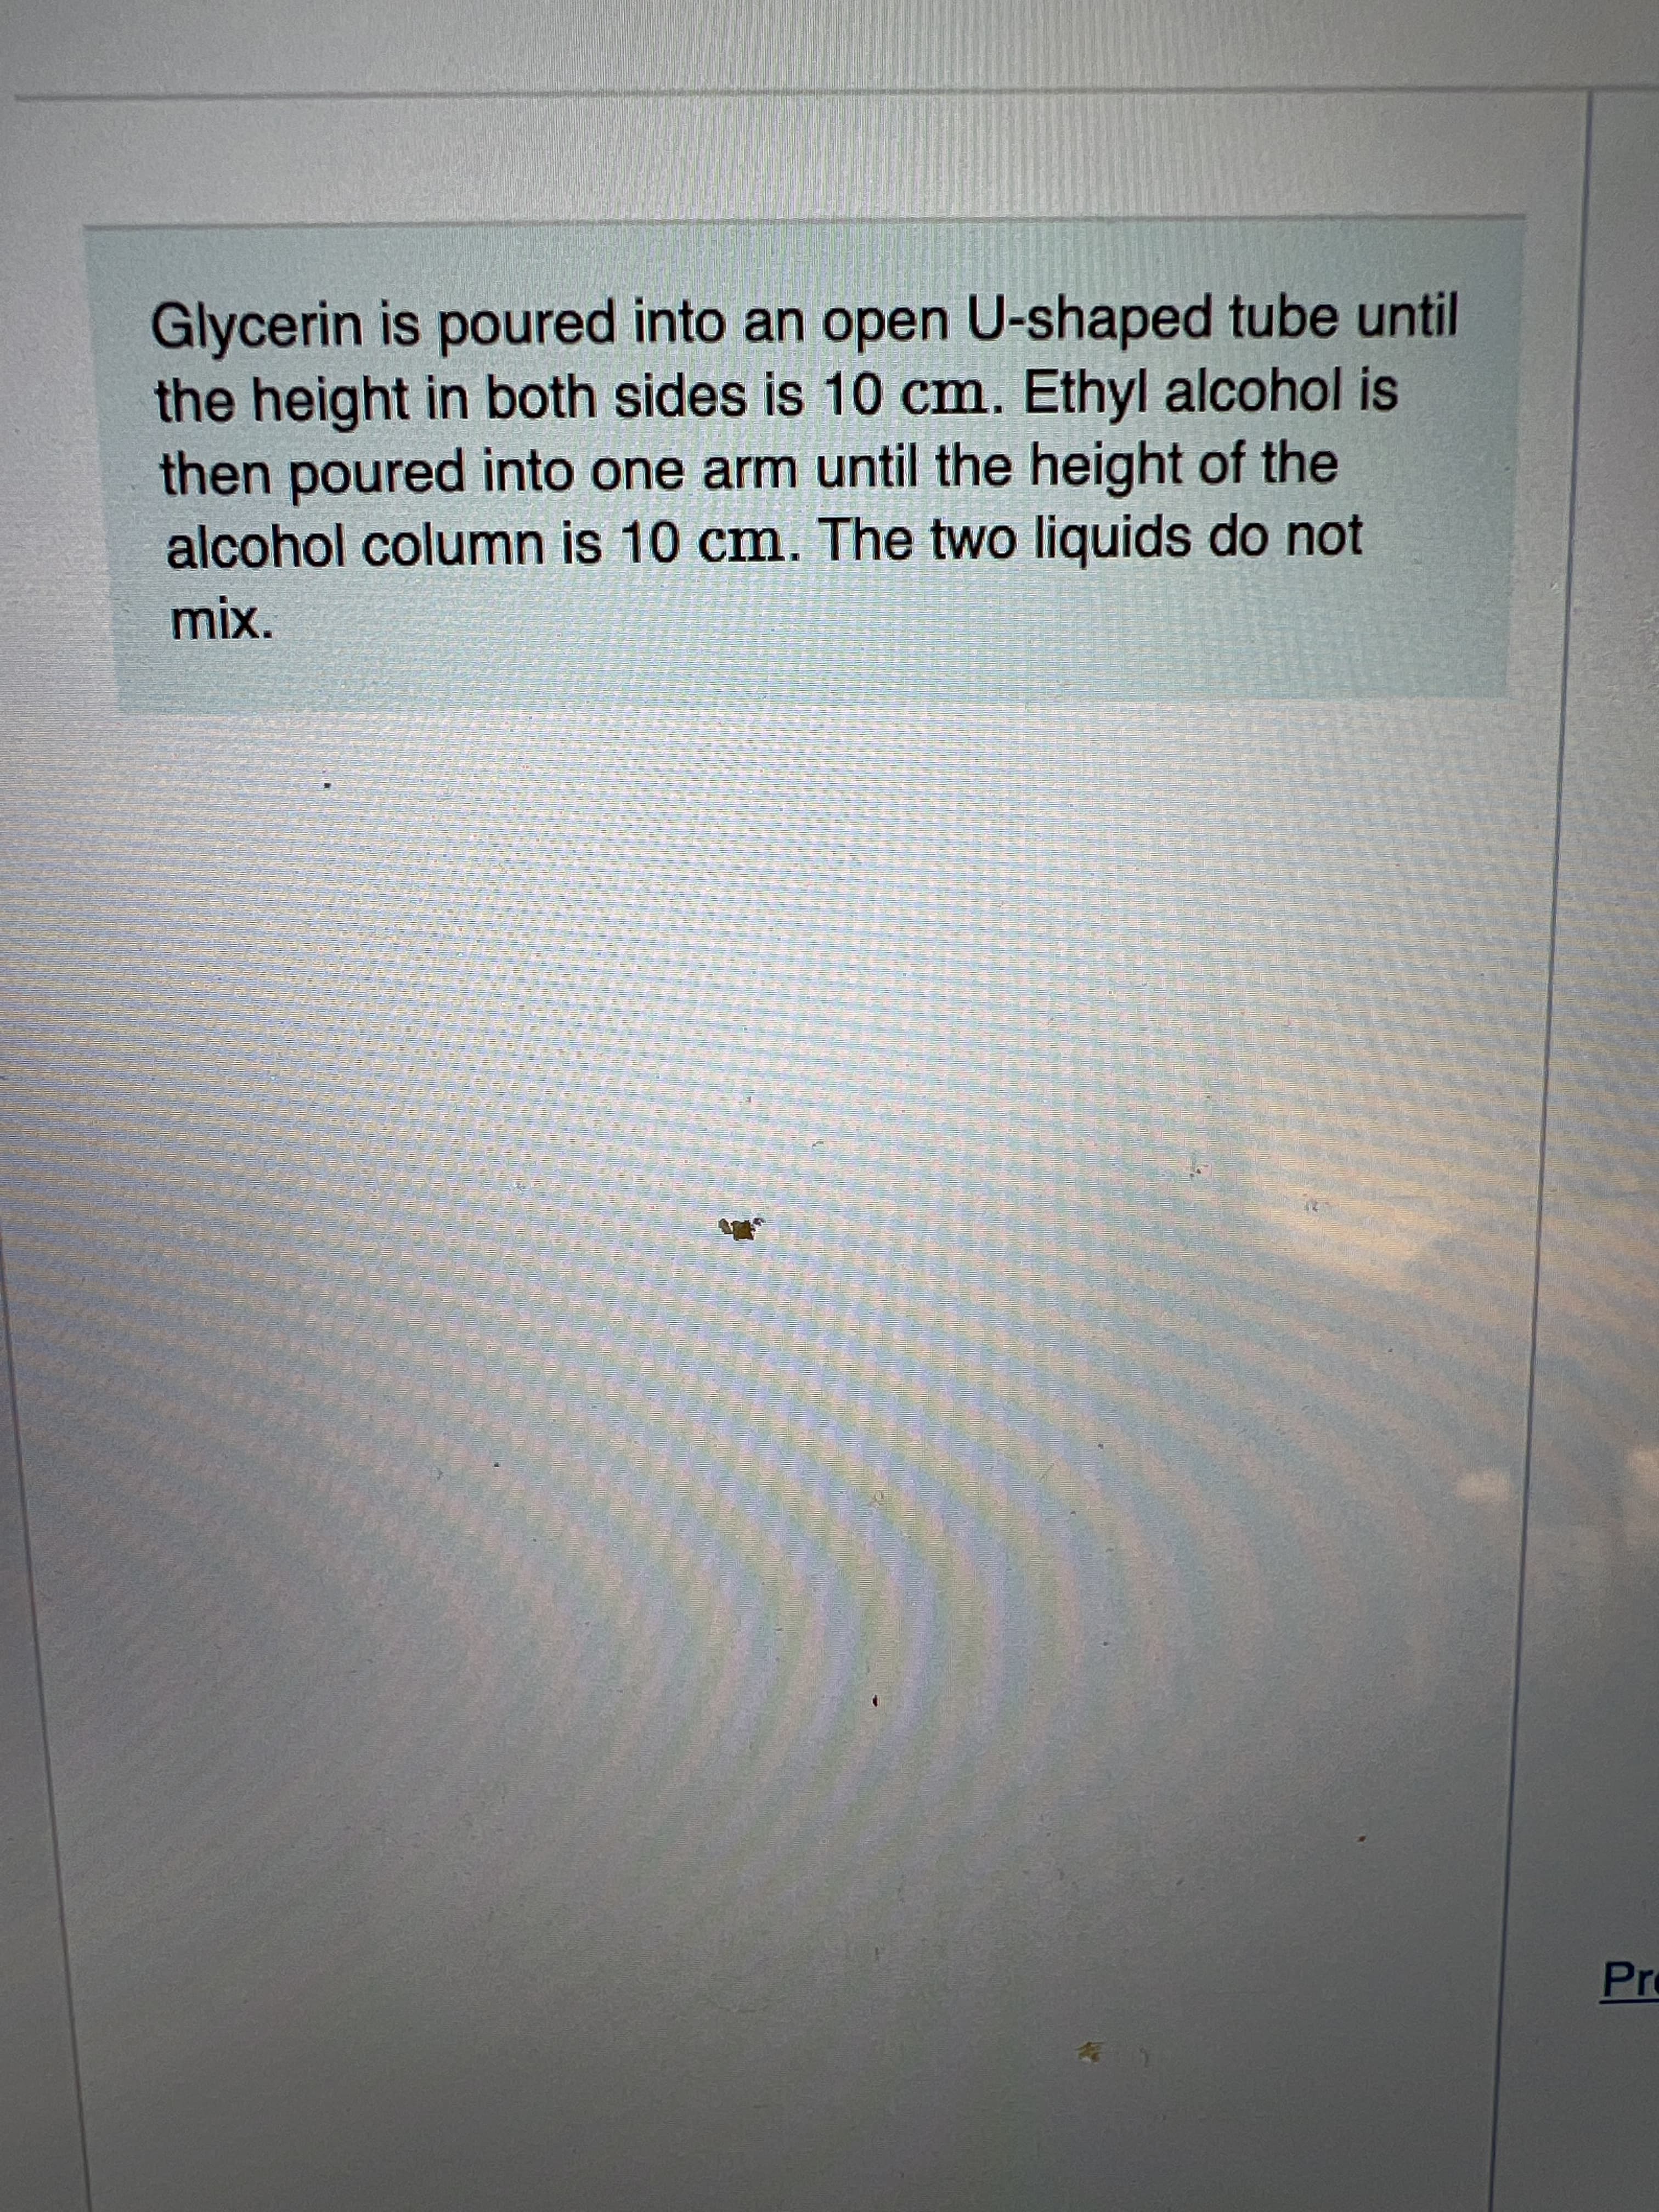 Glycerin is poured into an open U-shaped tube until
the height in both sides is 10 cm. Ethyl alcohol is
then poured into one arm until the height of the
alcohol column is 10 cm. The two liquids do not
mix.
